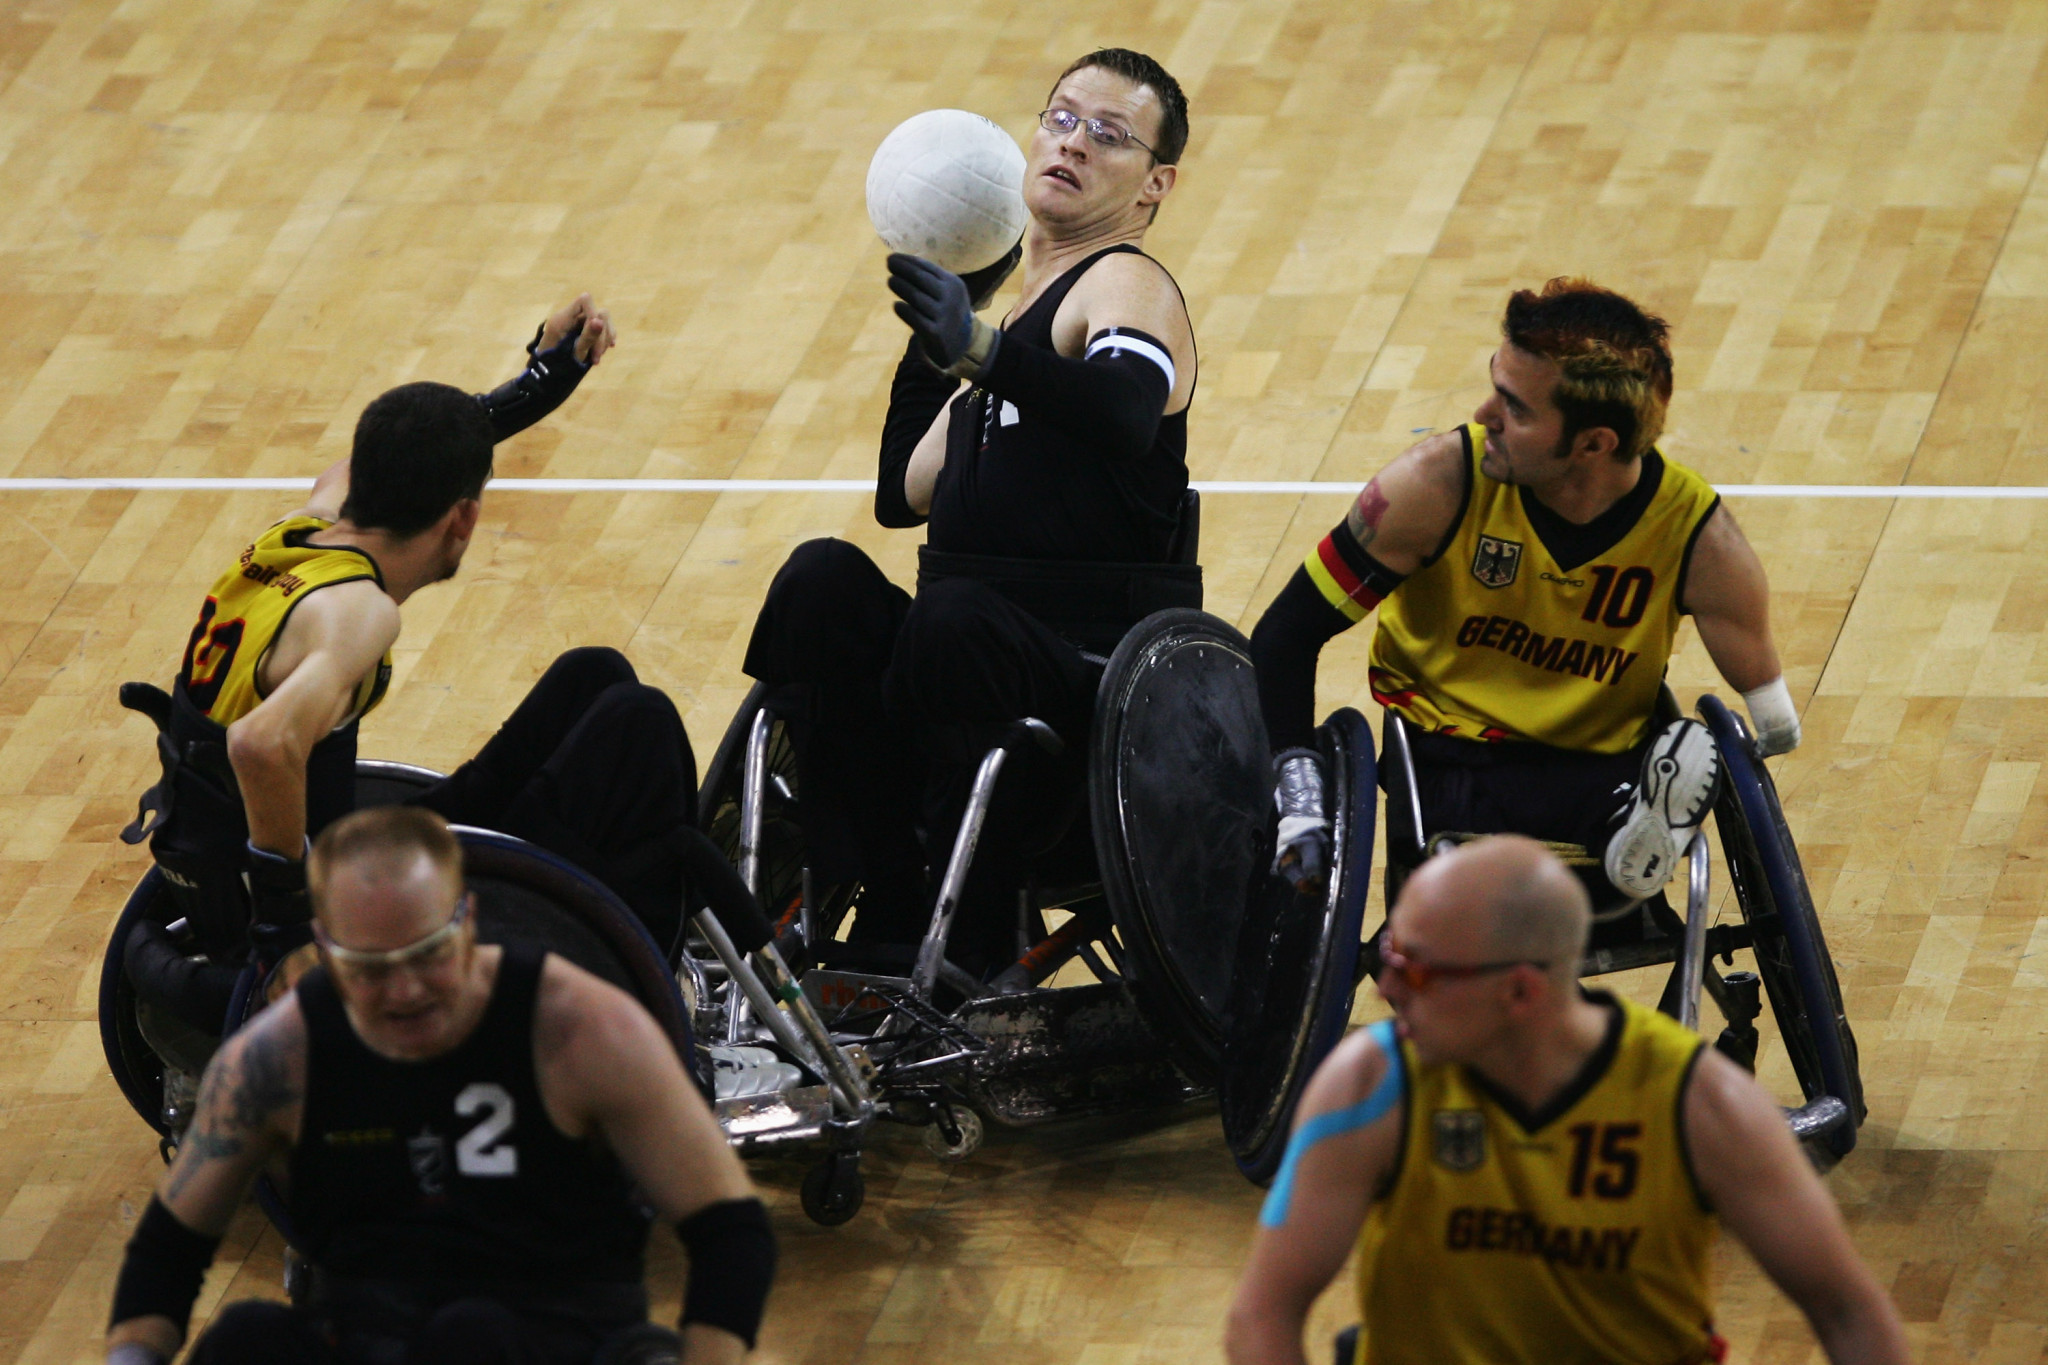 Paralympic gold medal-winning wheelchair rugby player Tim Johnson was among the athletes in attendance ©Getty Images